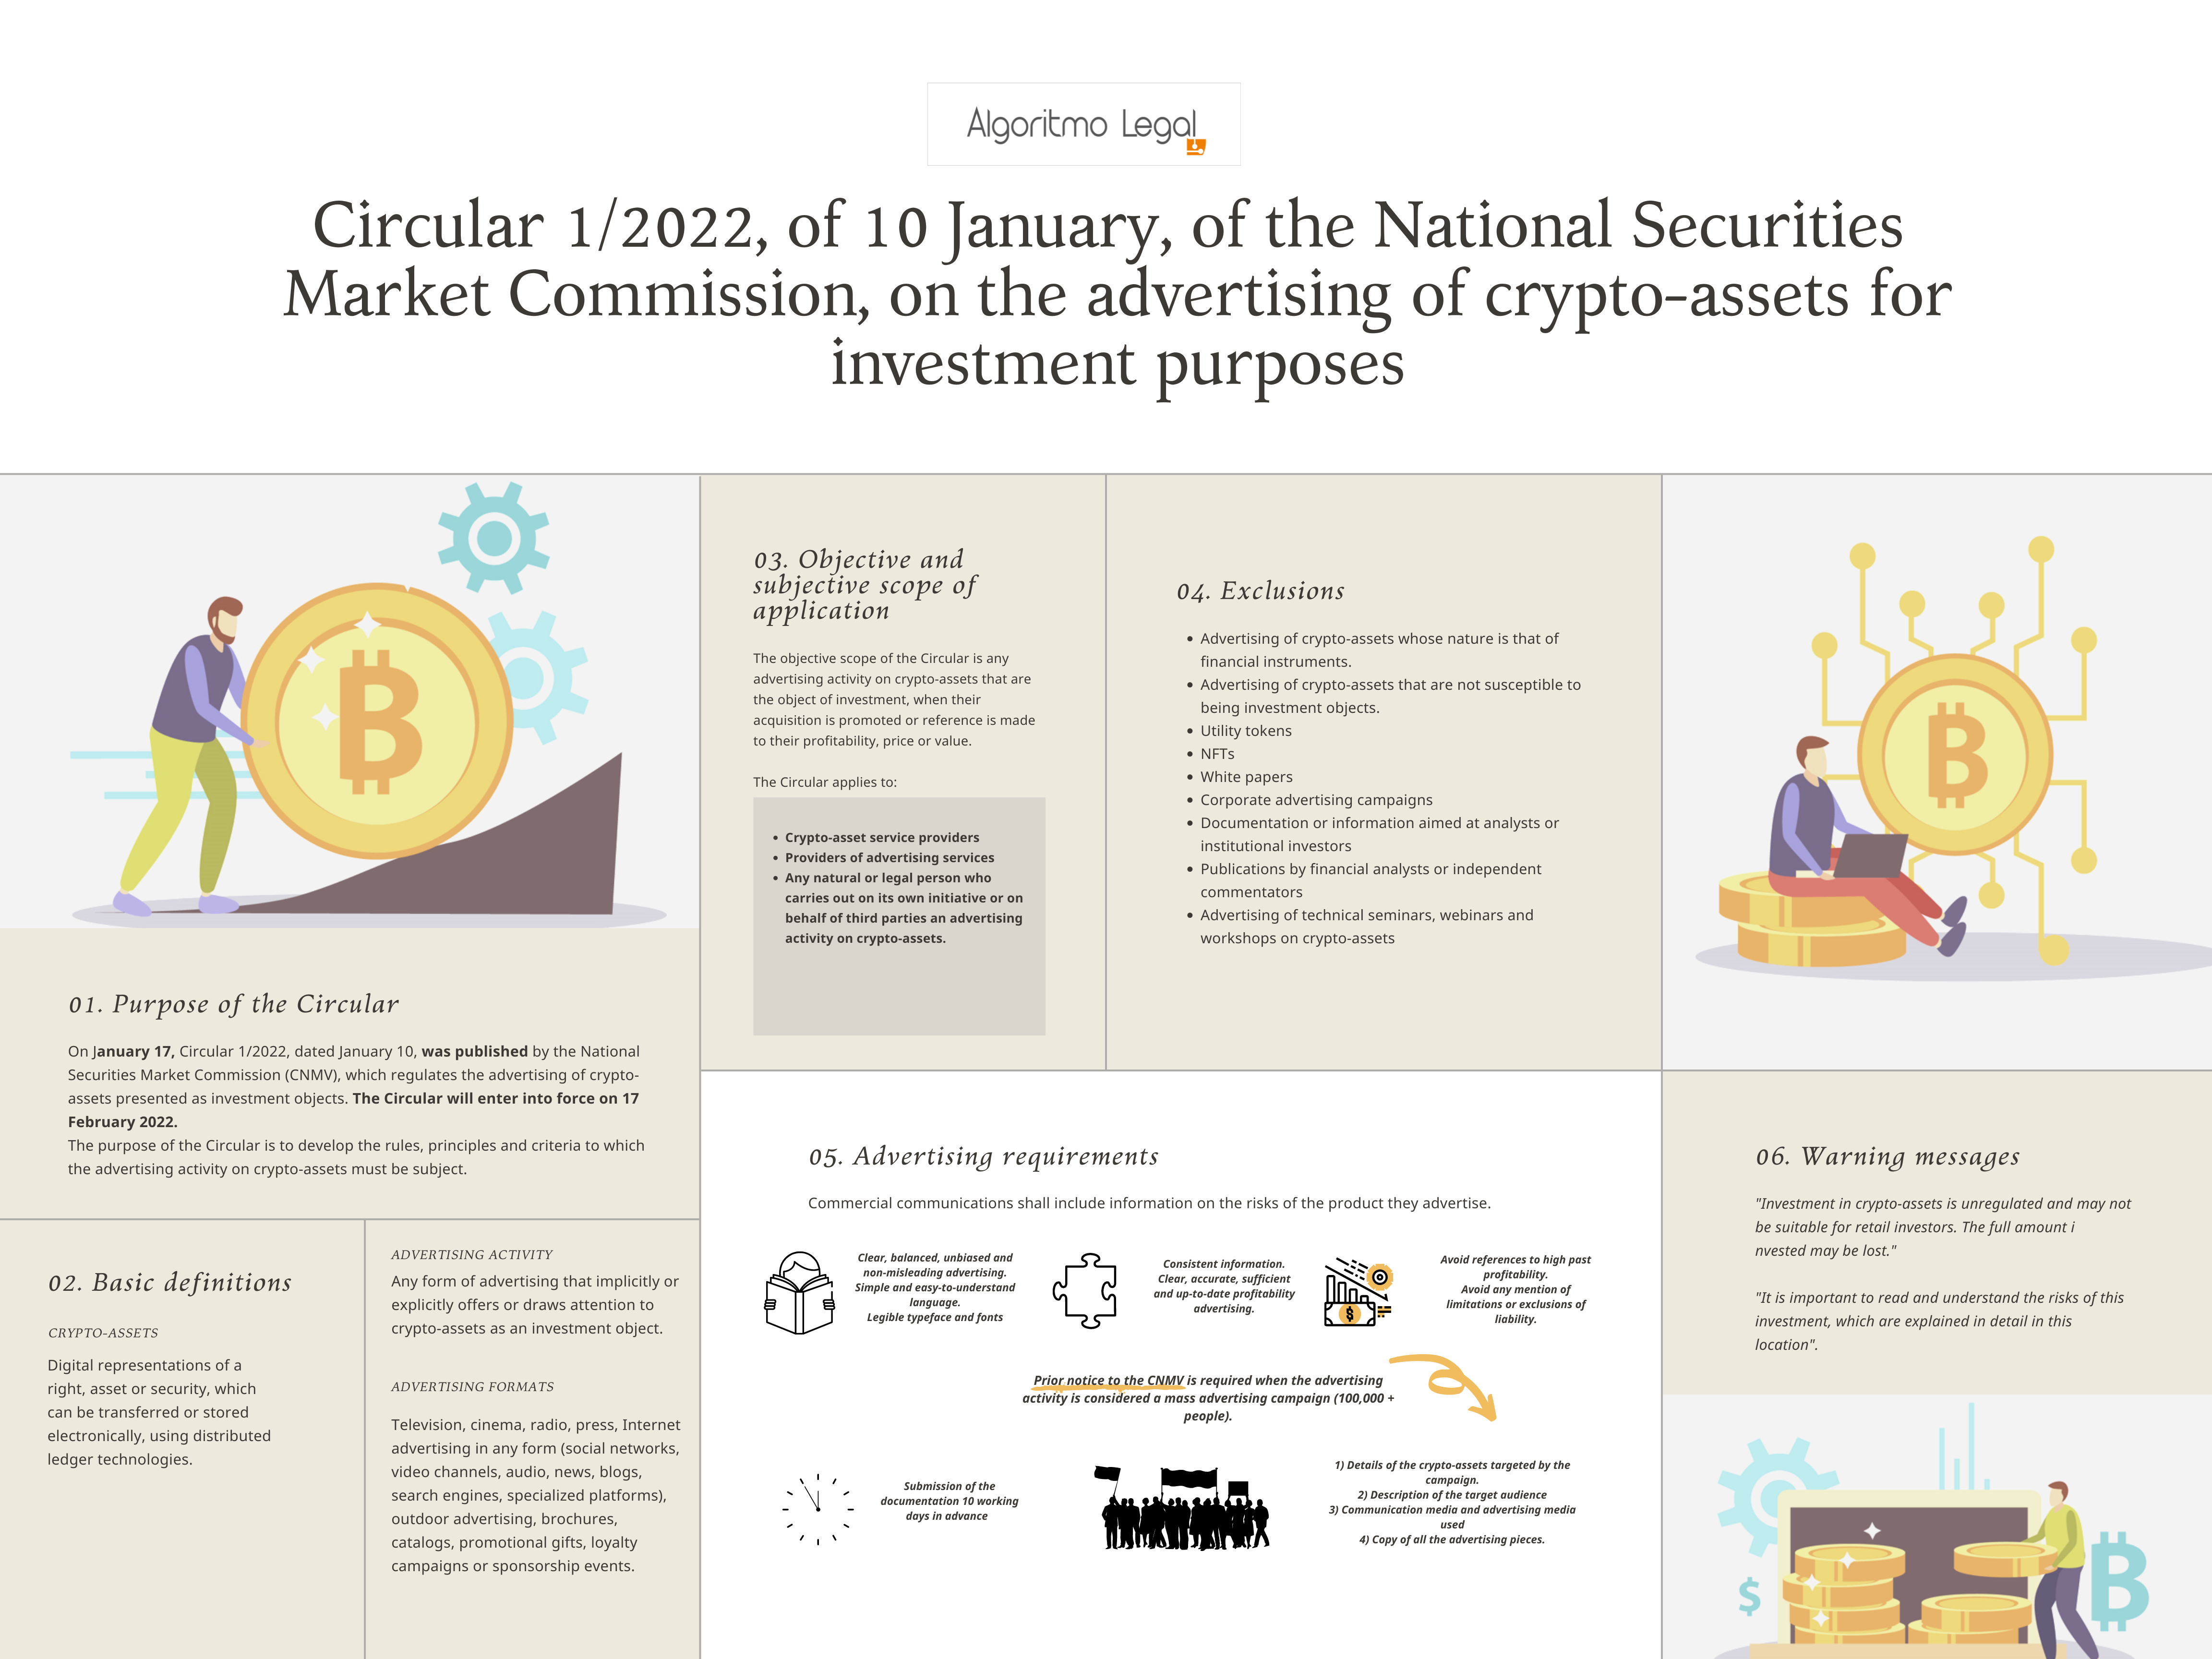 Advertising requirements on crypto-assets (Spain)